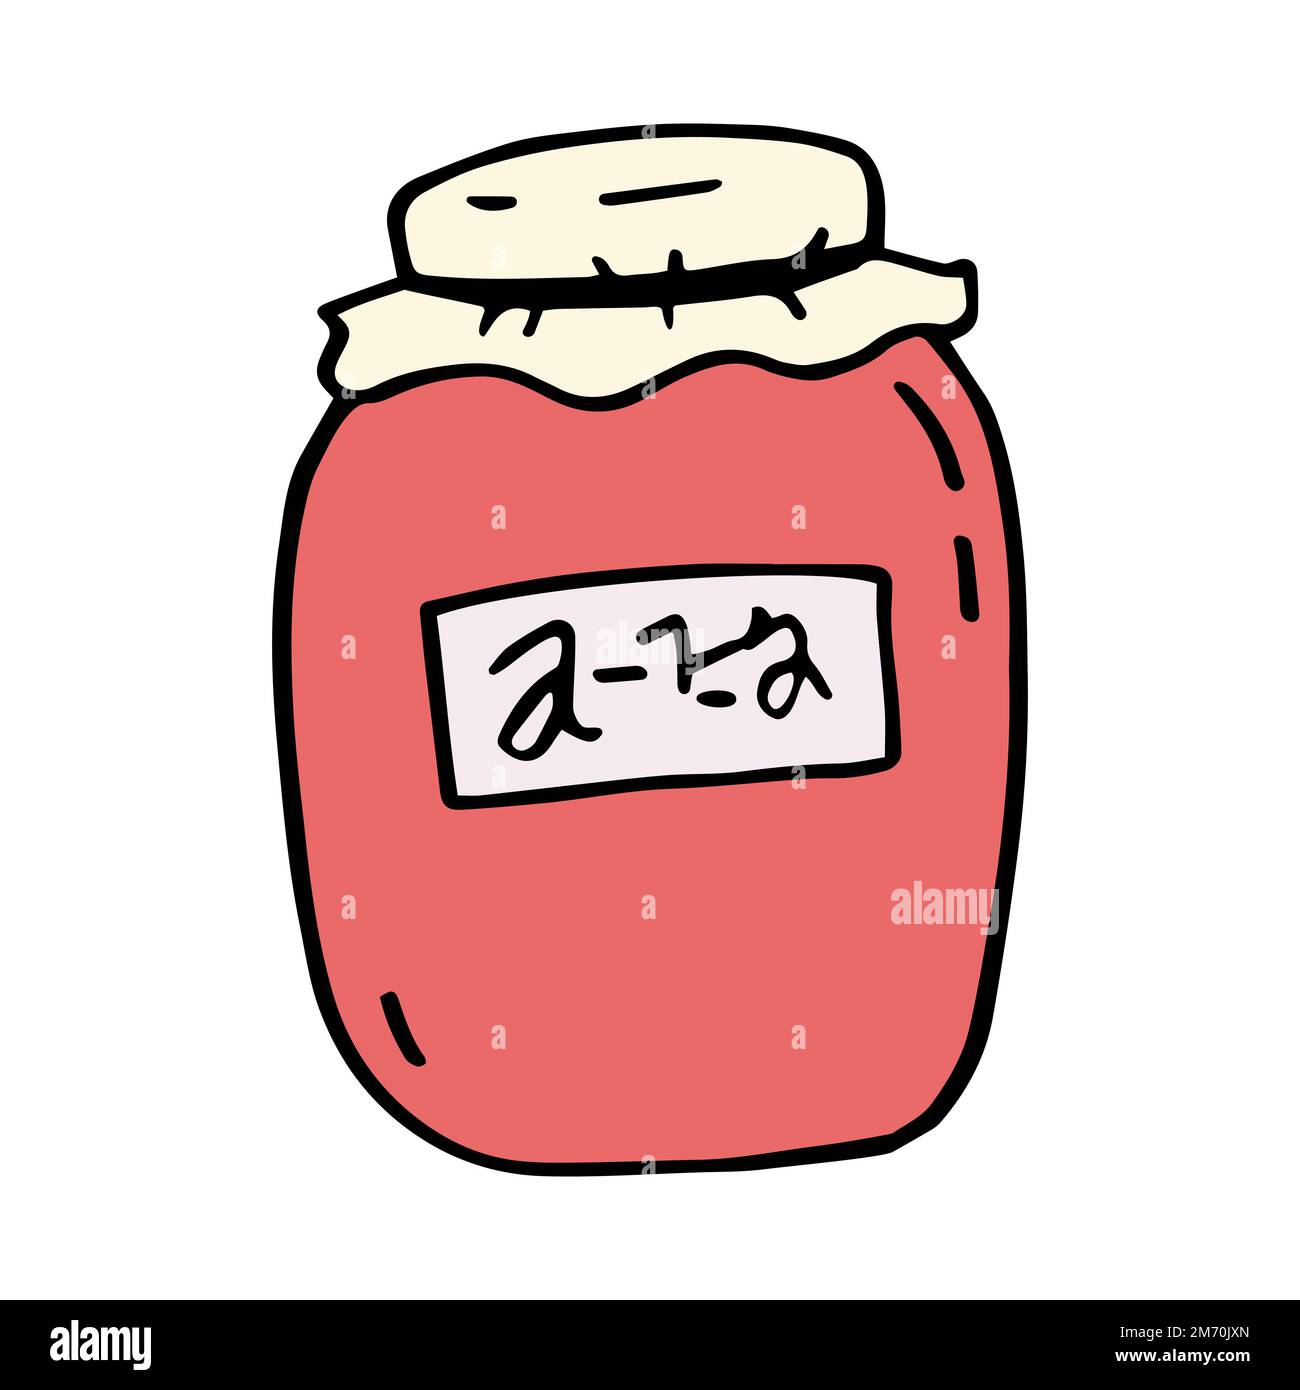 Jar of jam in doodle style. Vector illustration isolated on a white background Stock Vector